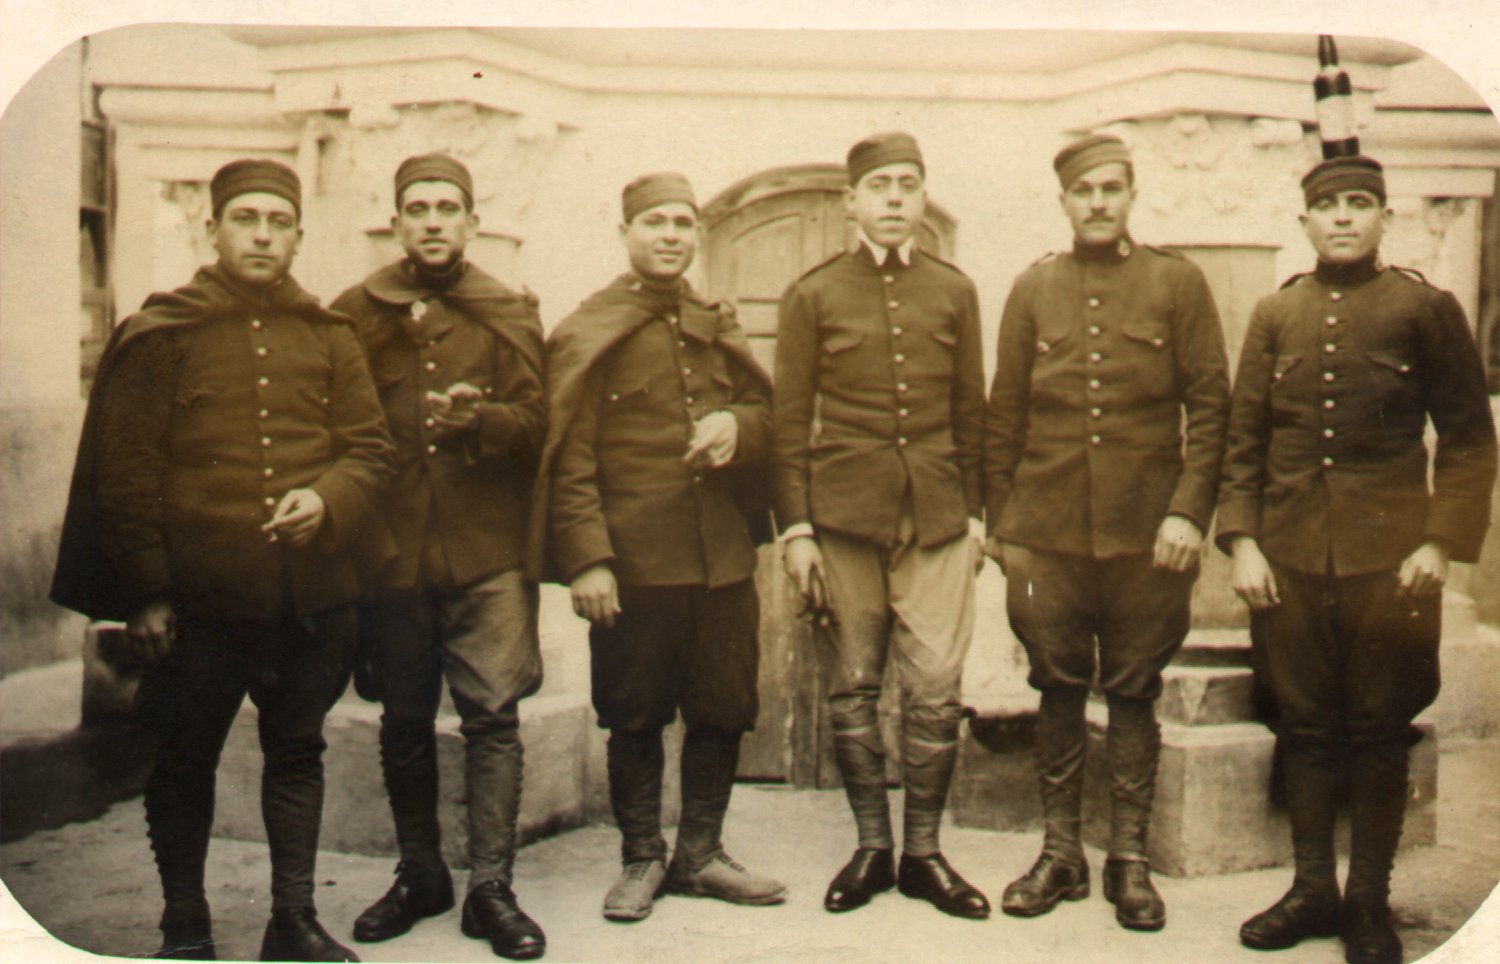 a group of men in uniform stand next to each other